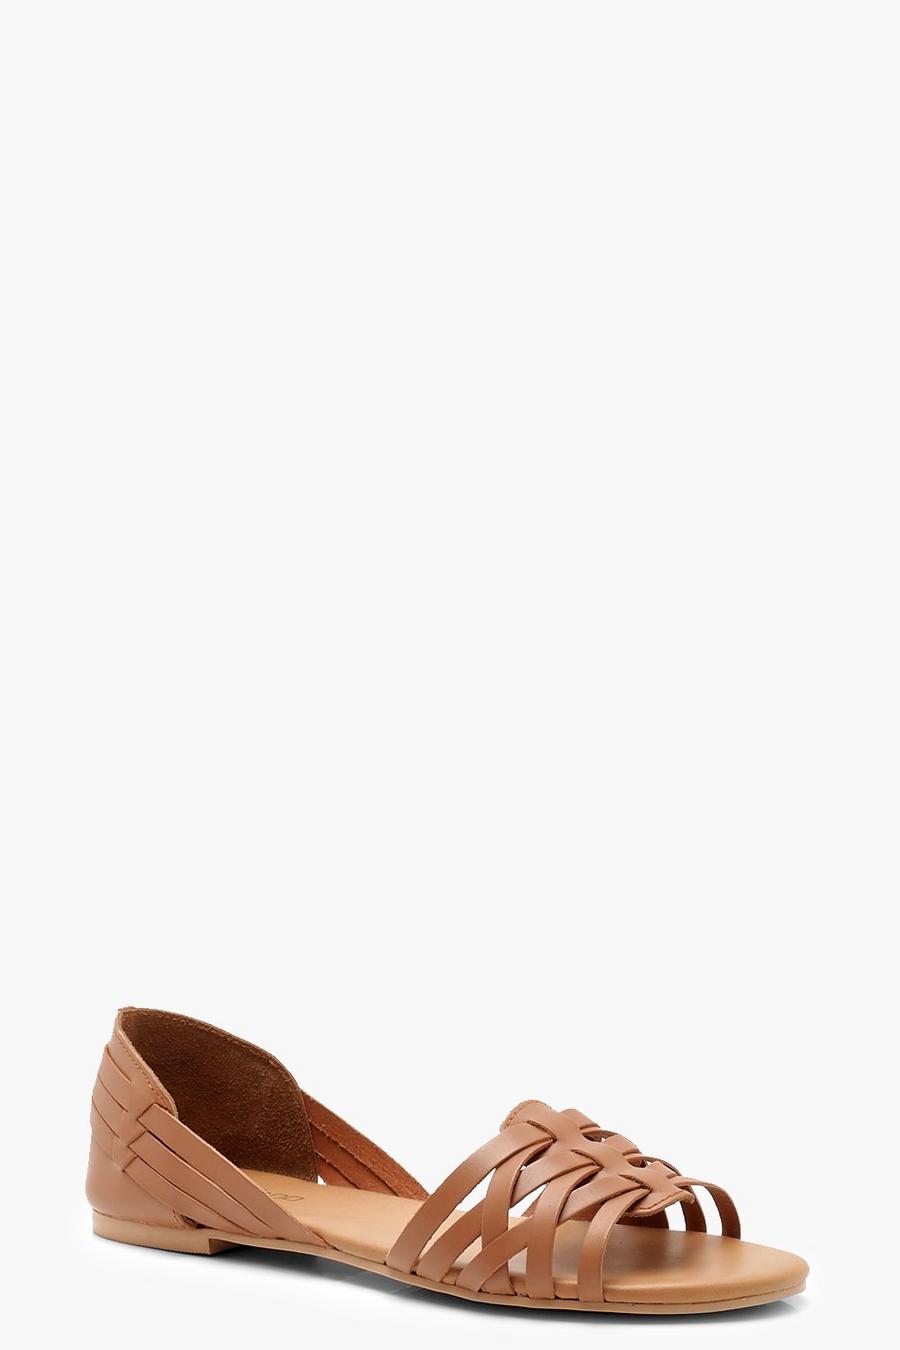 Tan brown Woven Leather Ballet Flats